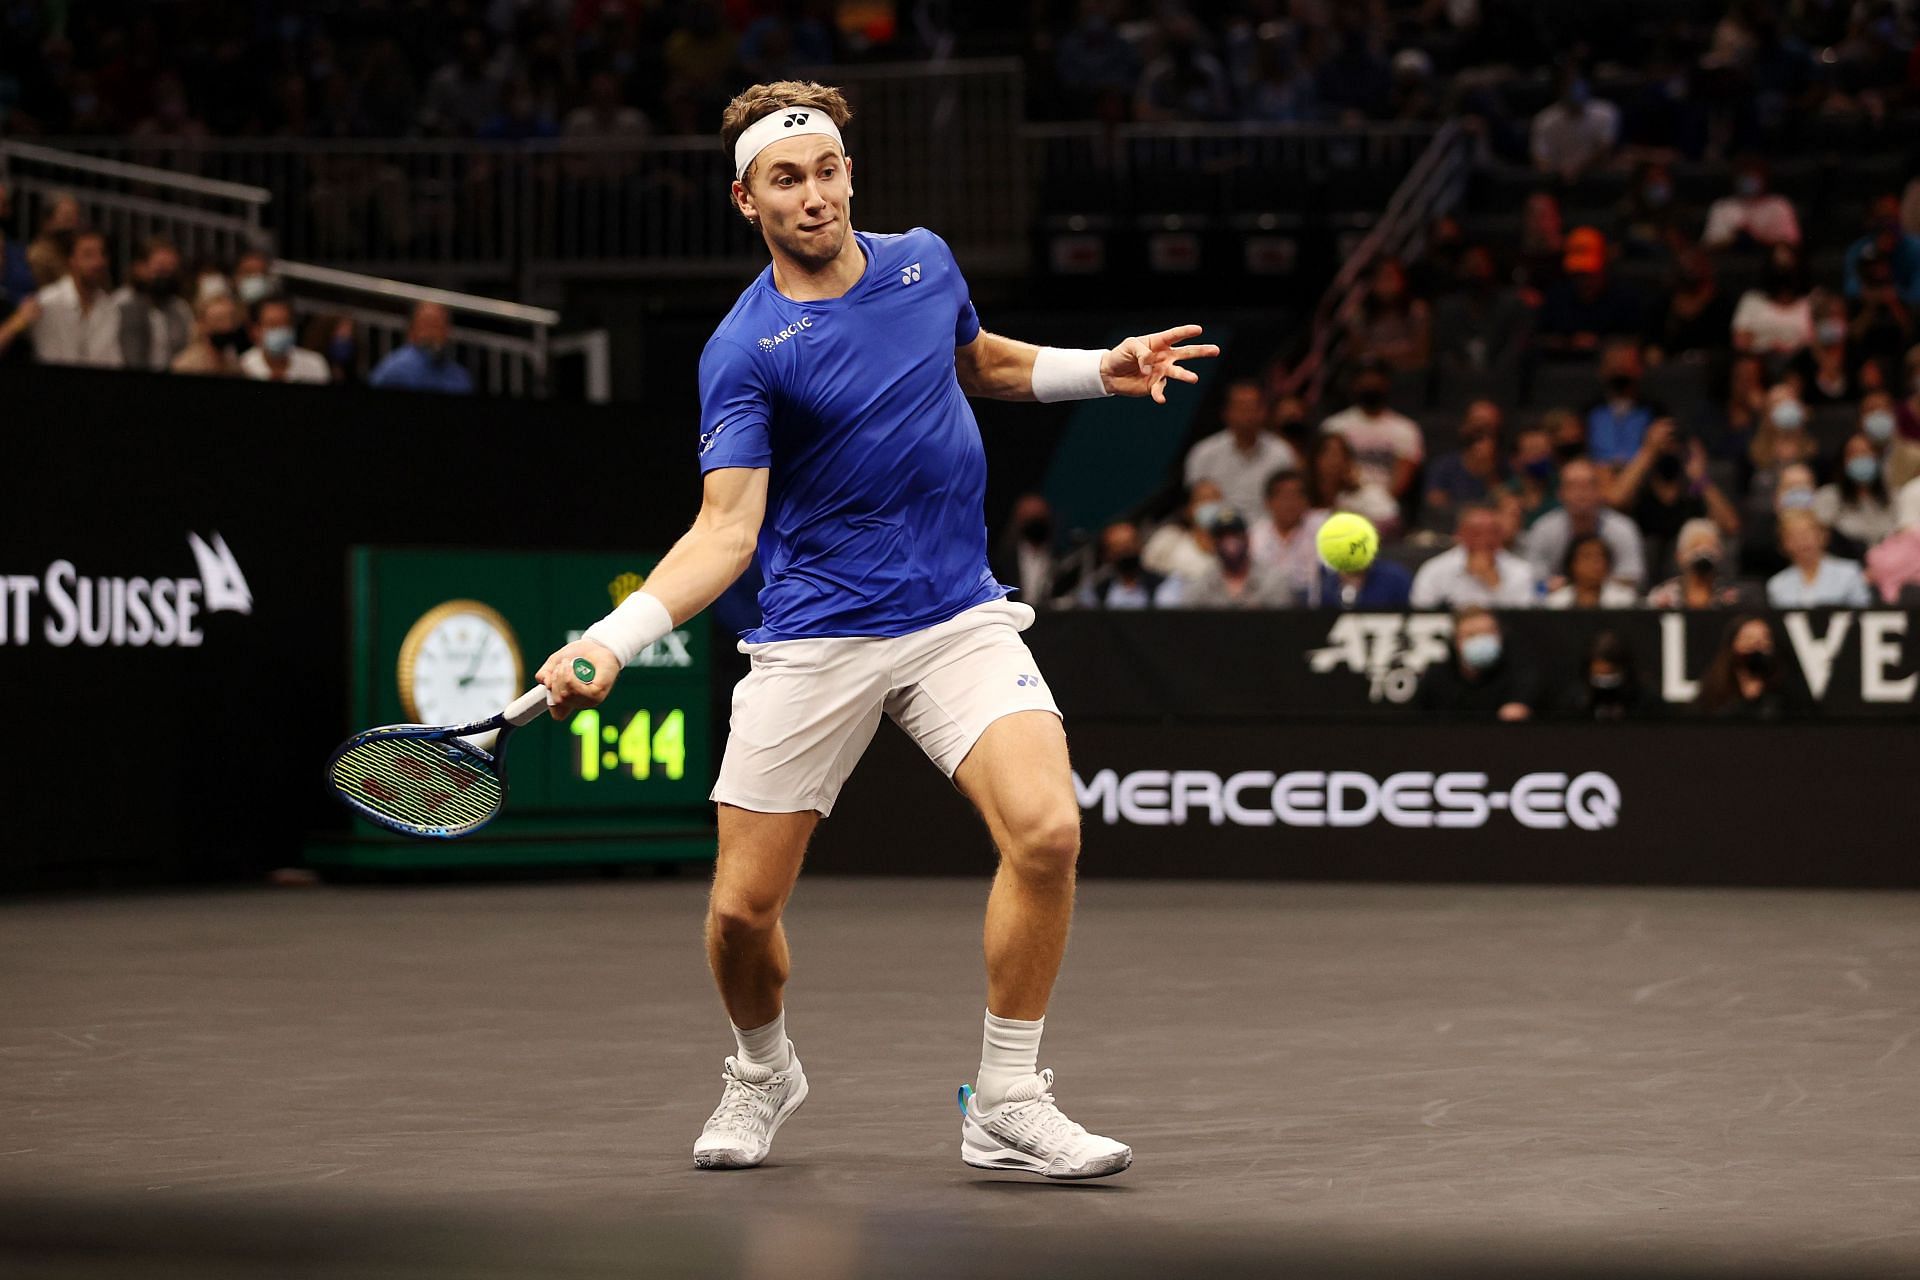 Casper Ruud in action during the 2021 Laver Cup